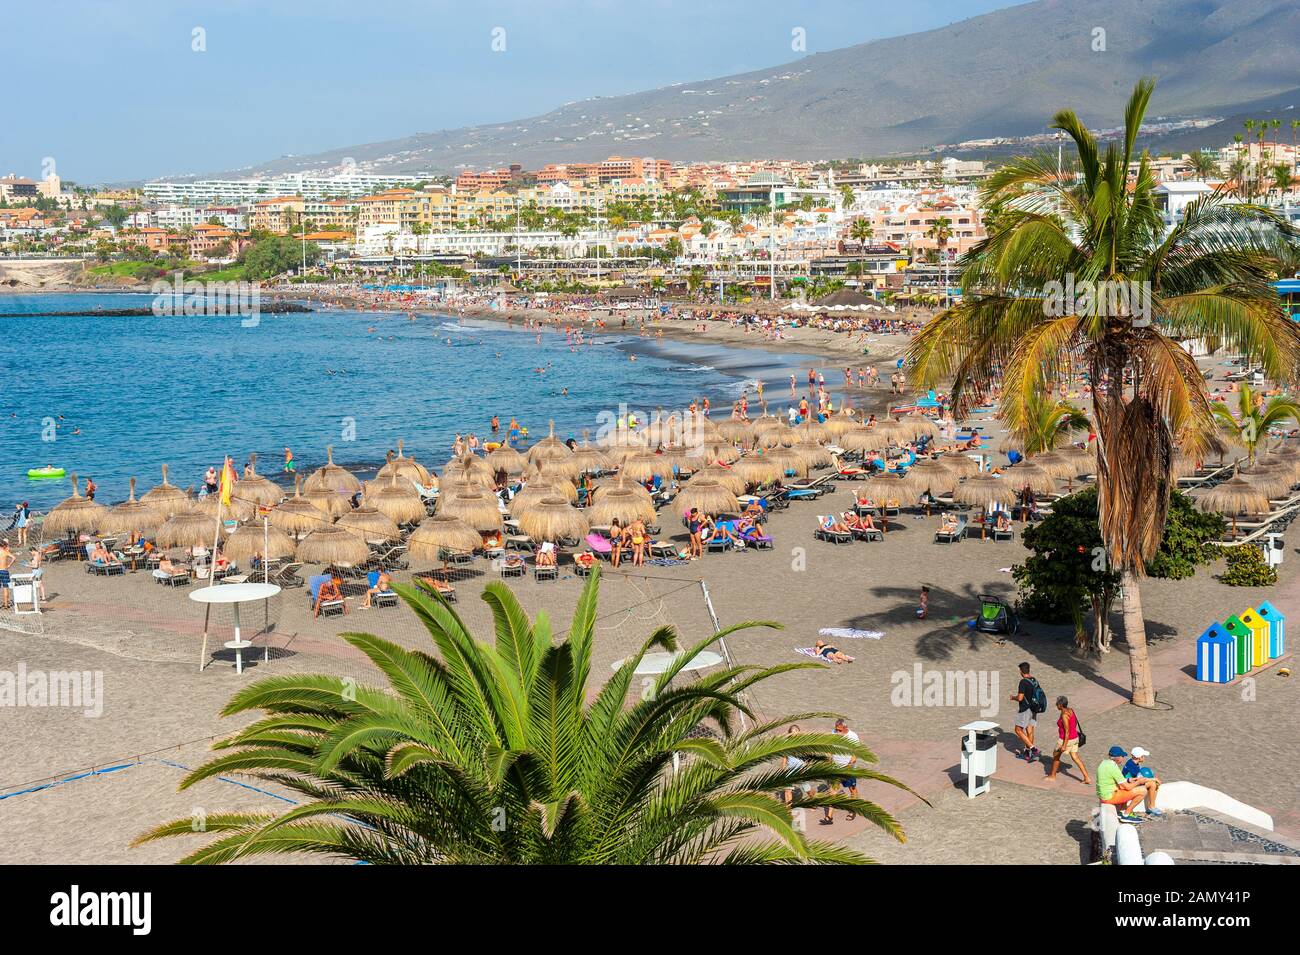 CANARY ISLAND TENERIFE, SPAIN - 26 DEC, 2019: View of the beach called playa de torviscas. One of the most popular beaches for tourists on Tenerife. Stock Photo